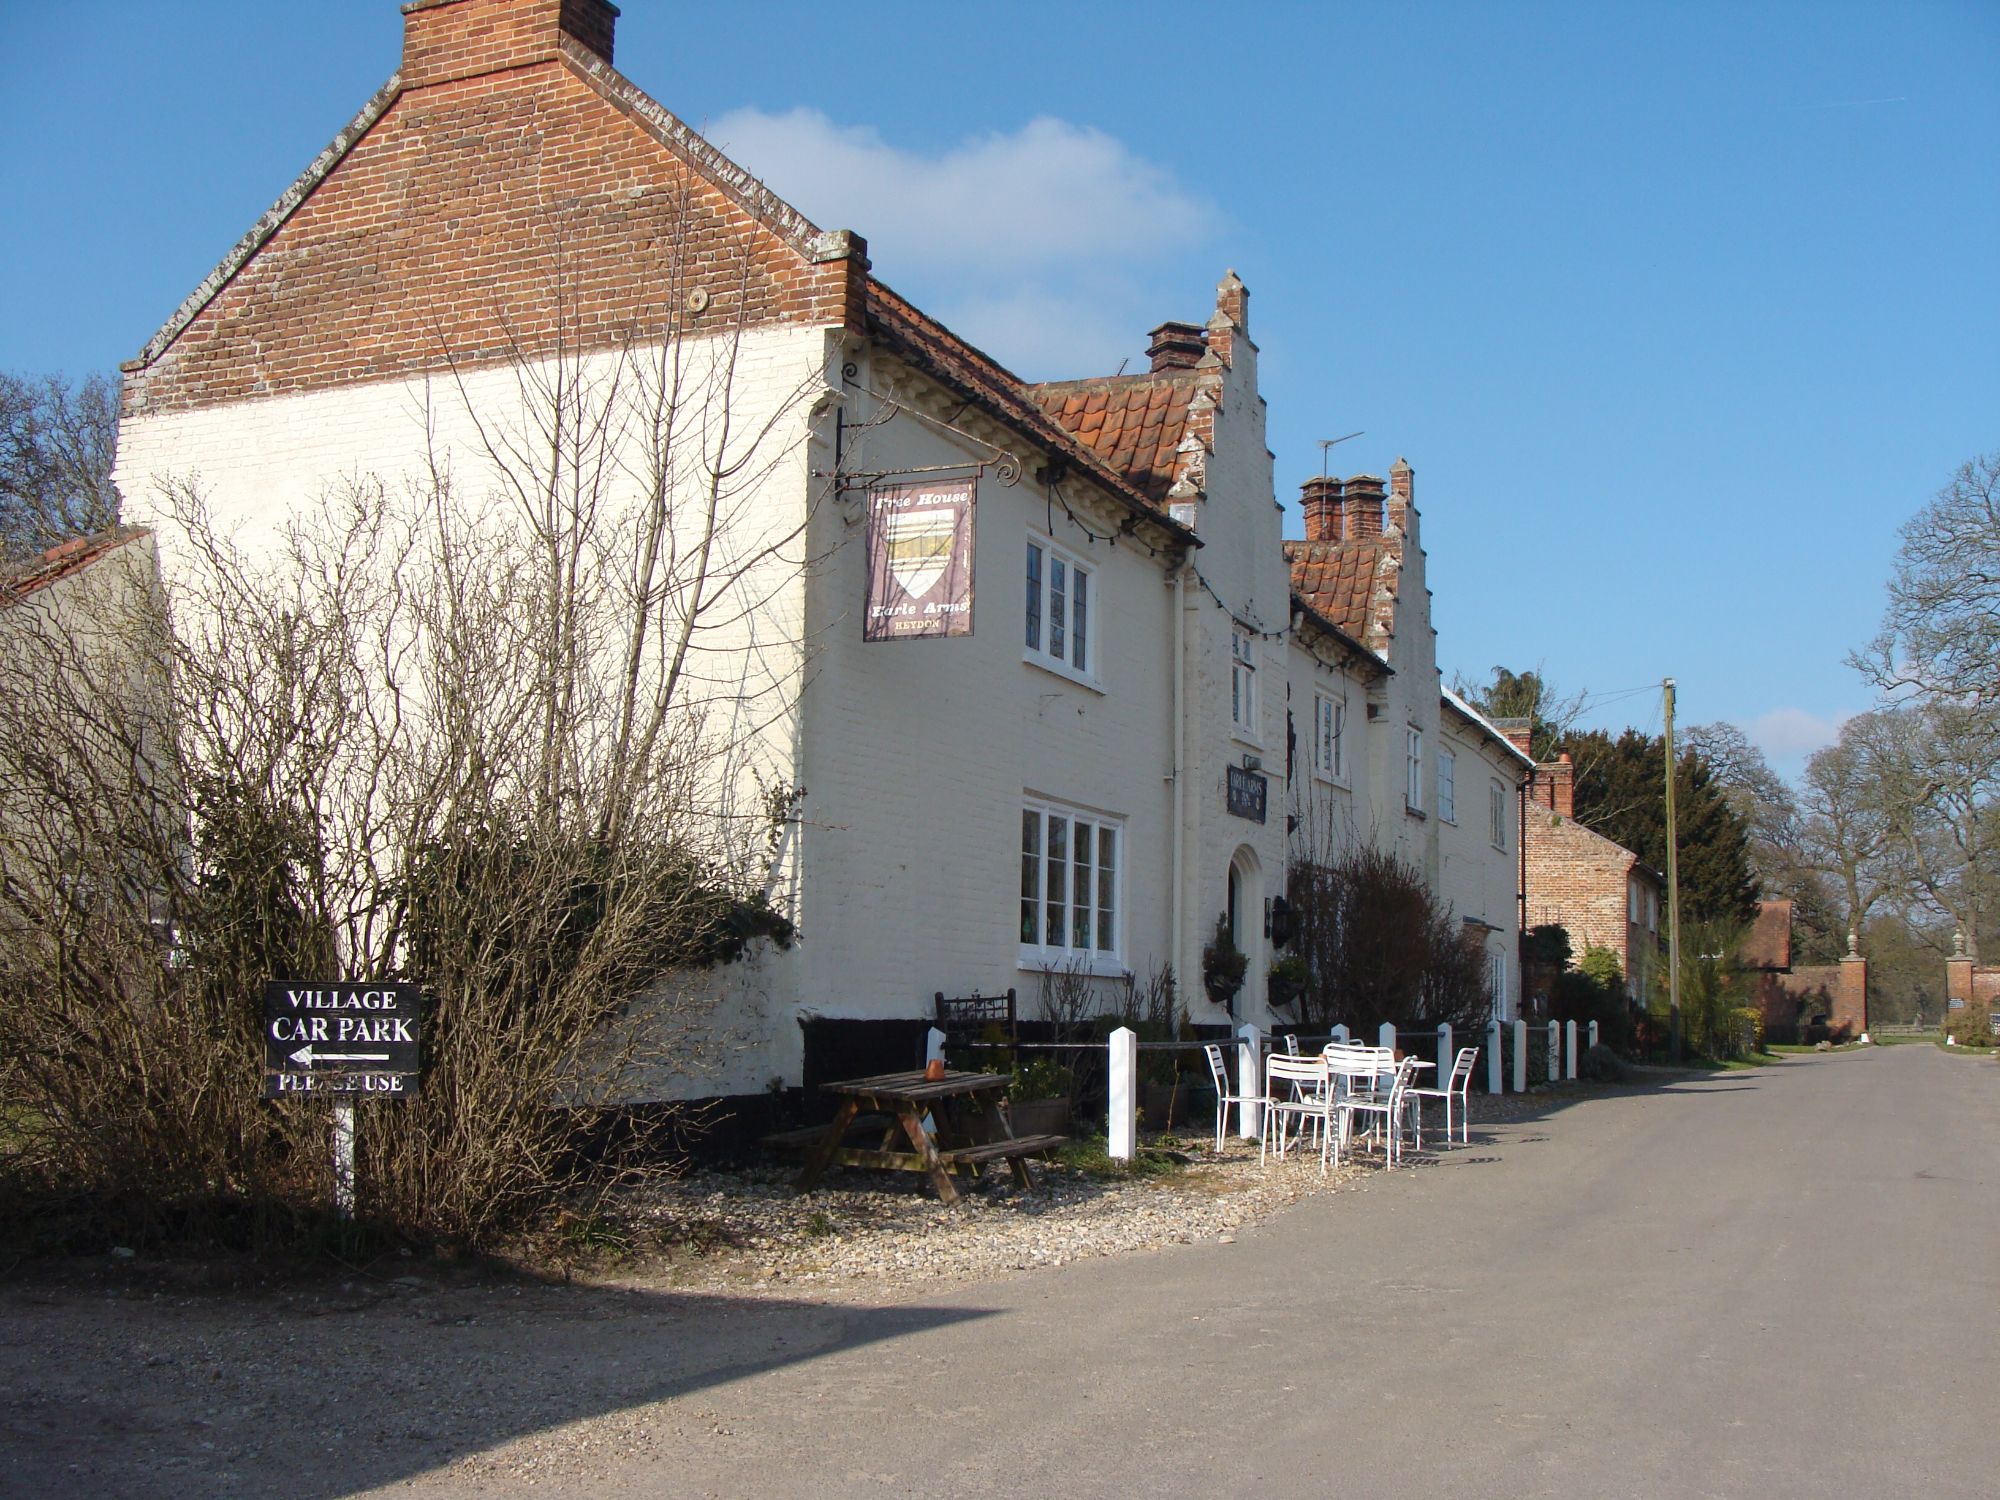 The Earle Arms